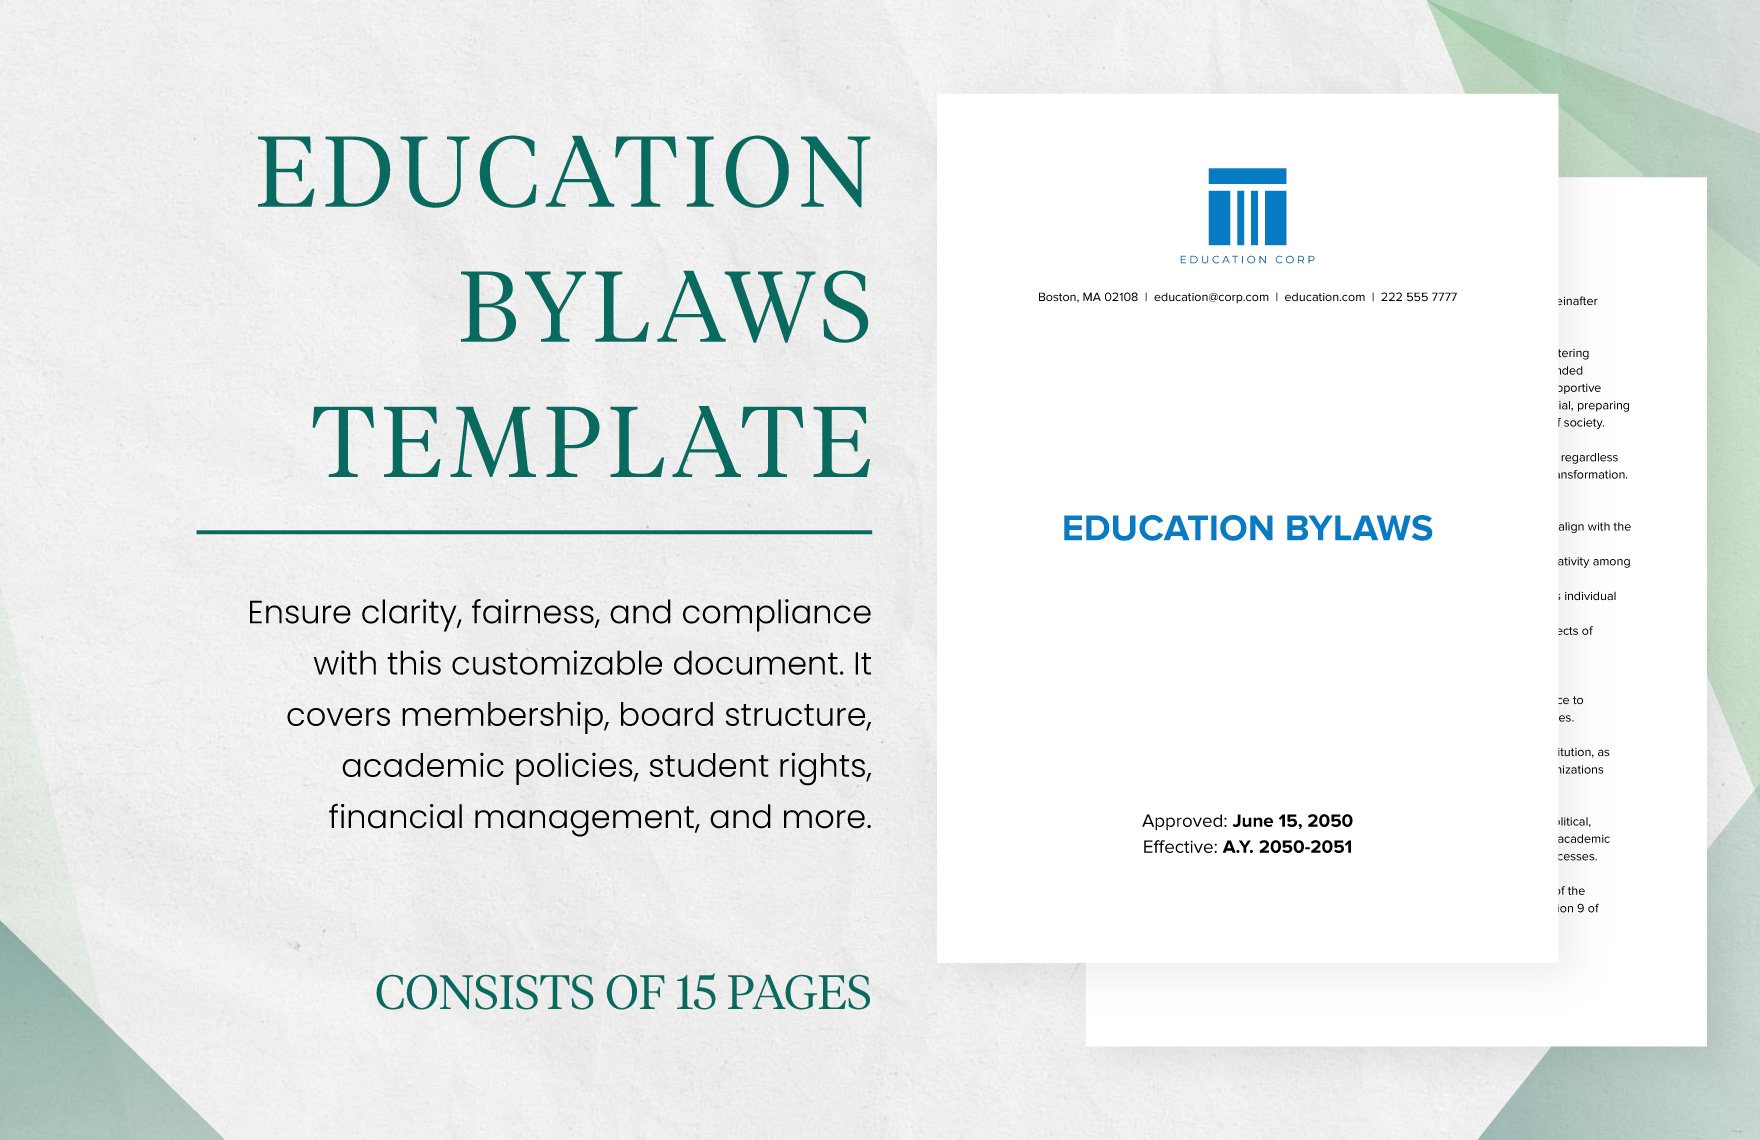 Education Bylaws Template in Word, Google Docs, PDF